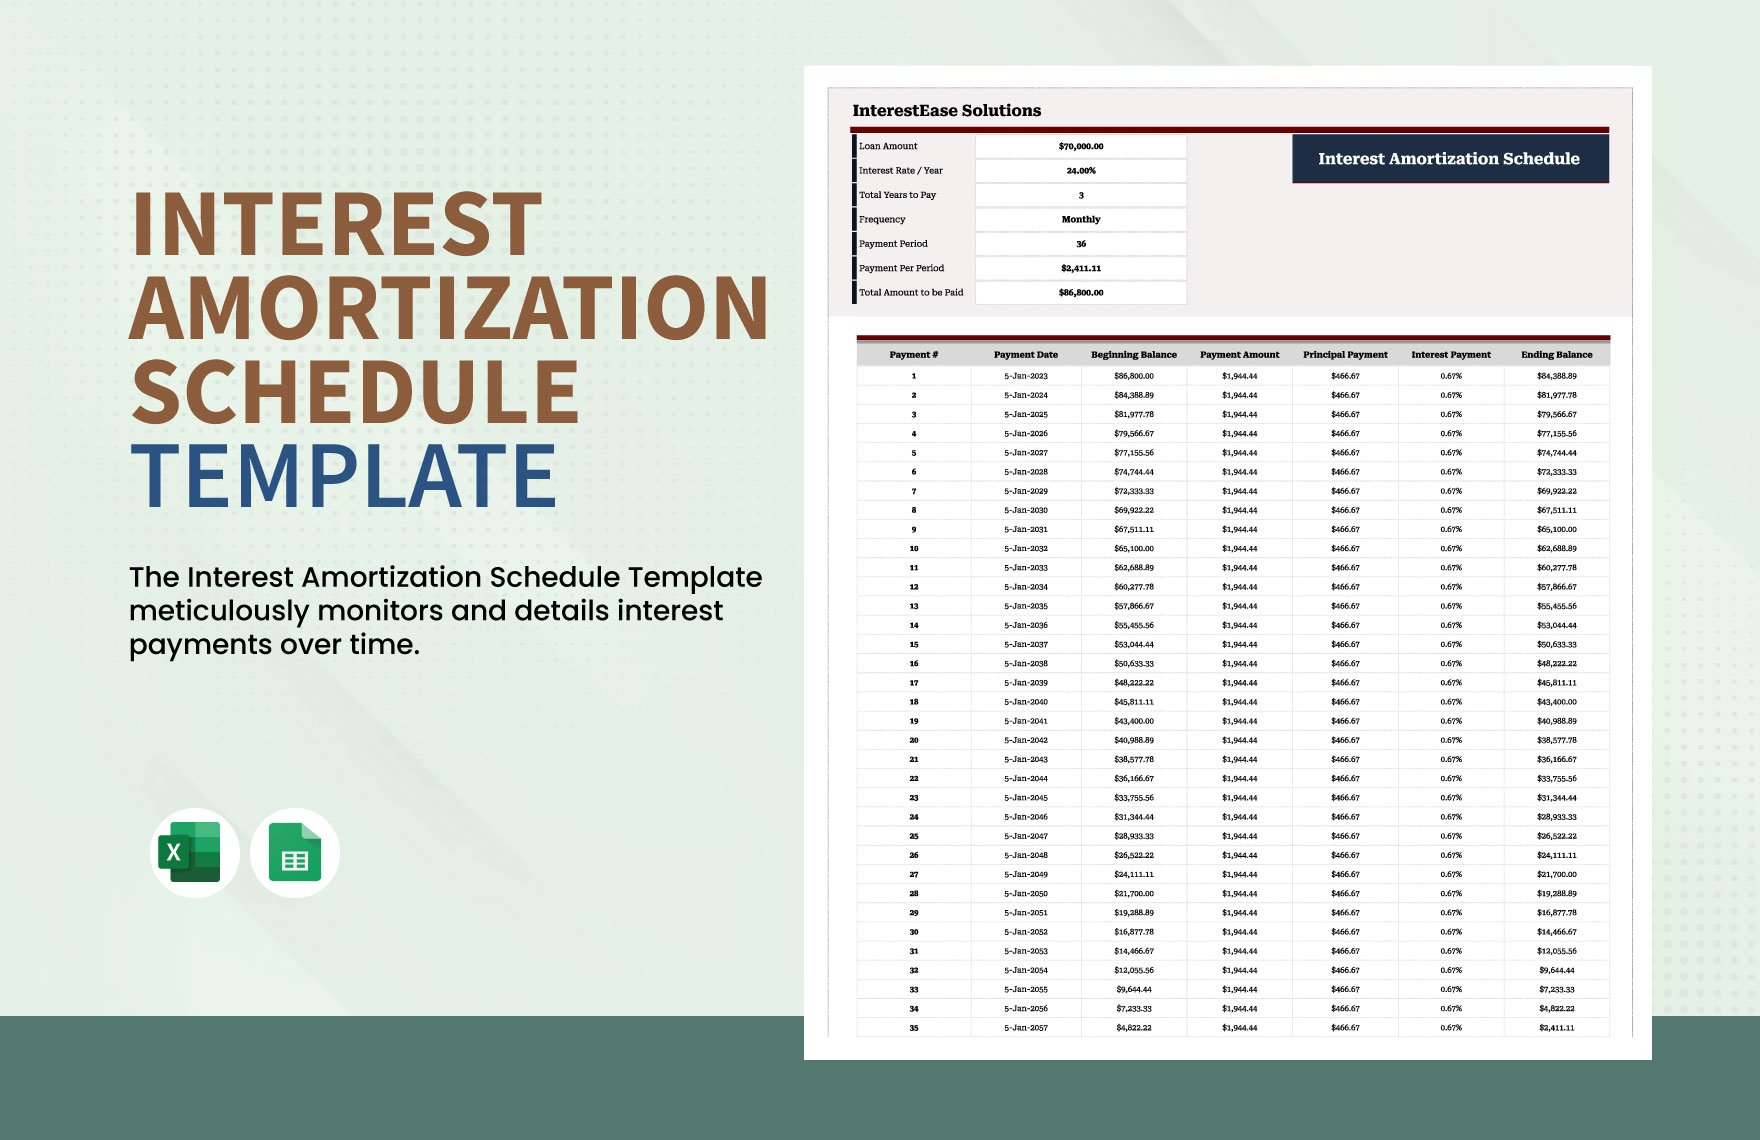 Interest Amortization Schedule Template in Excel, Google Sheets